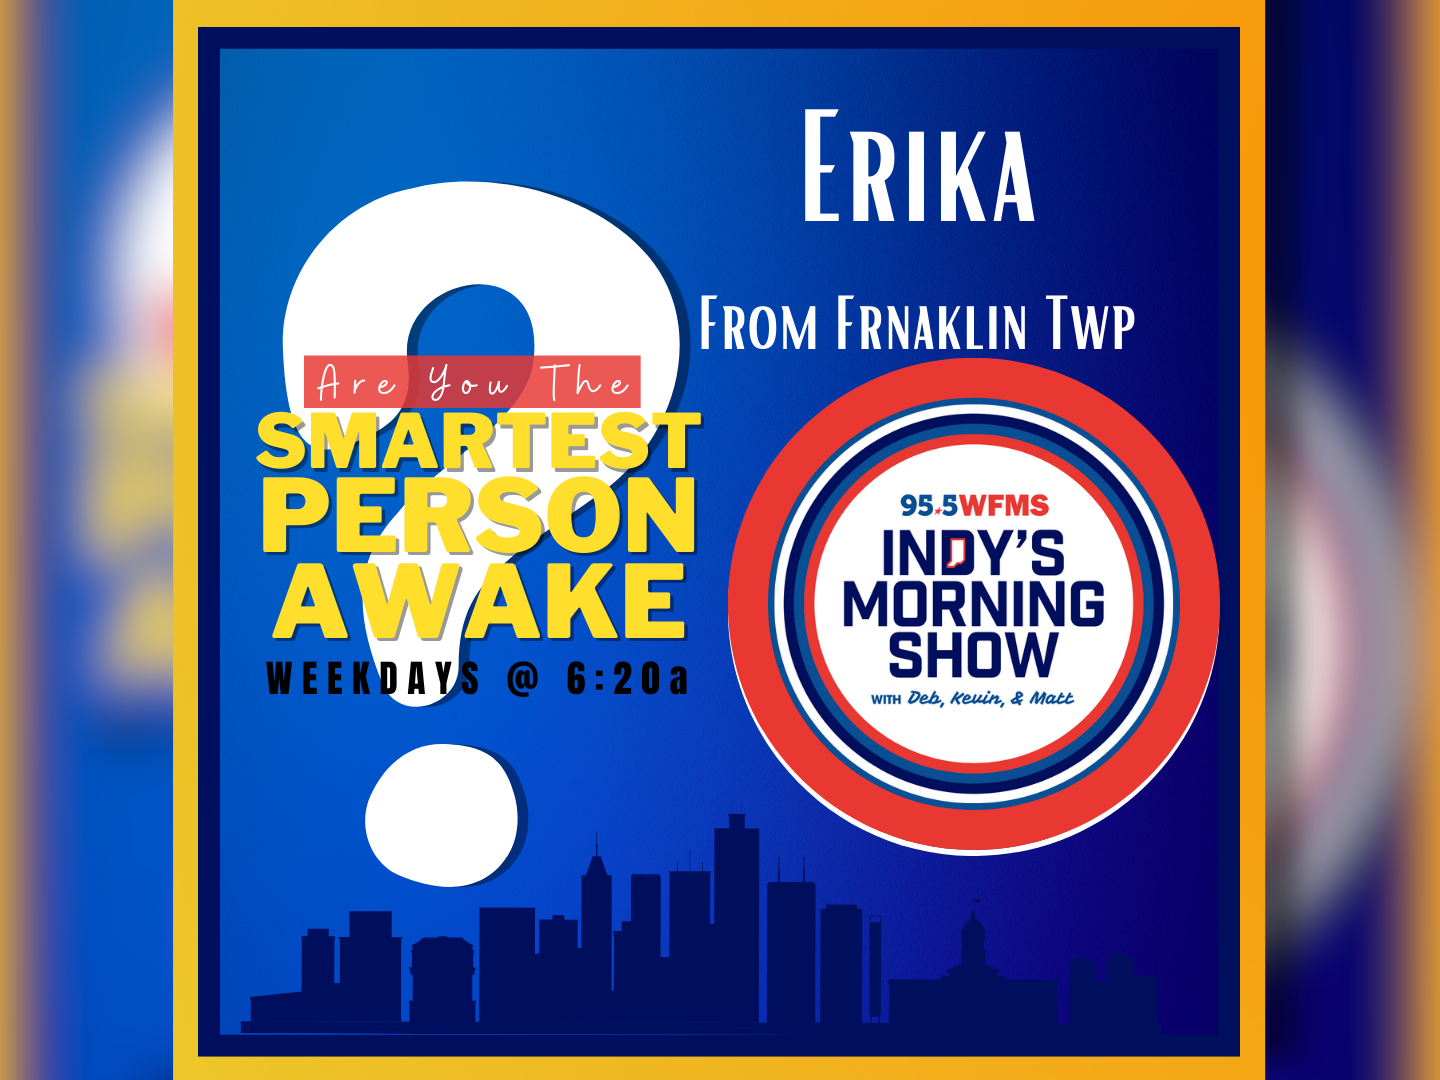 Smartest Person Awake - Erika from Franklin Twp